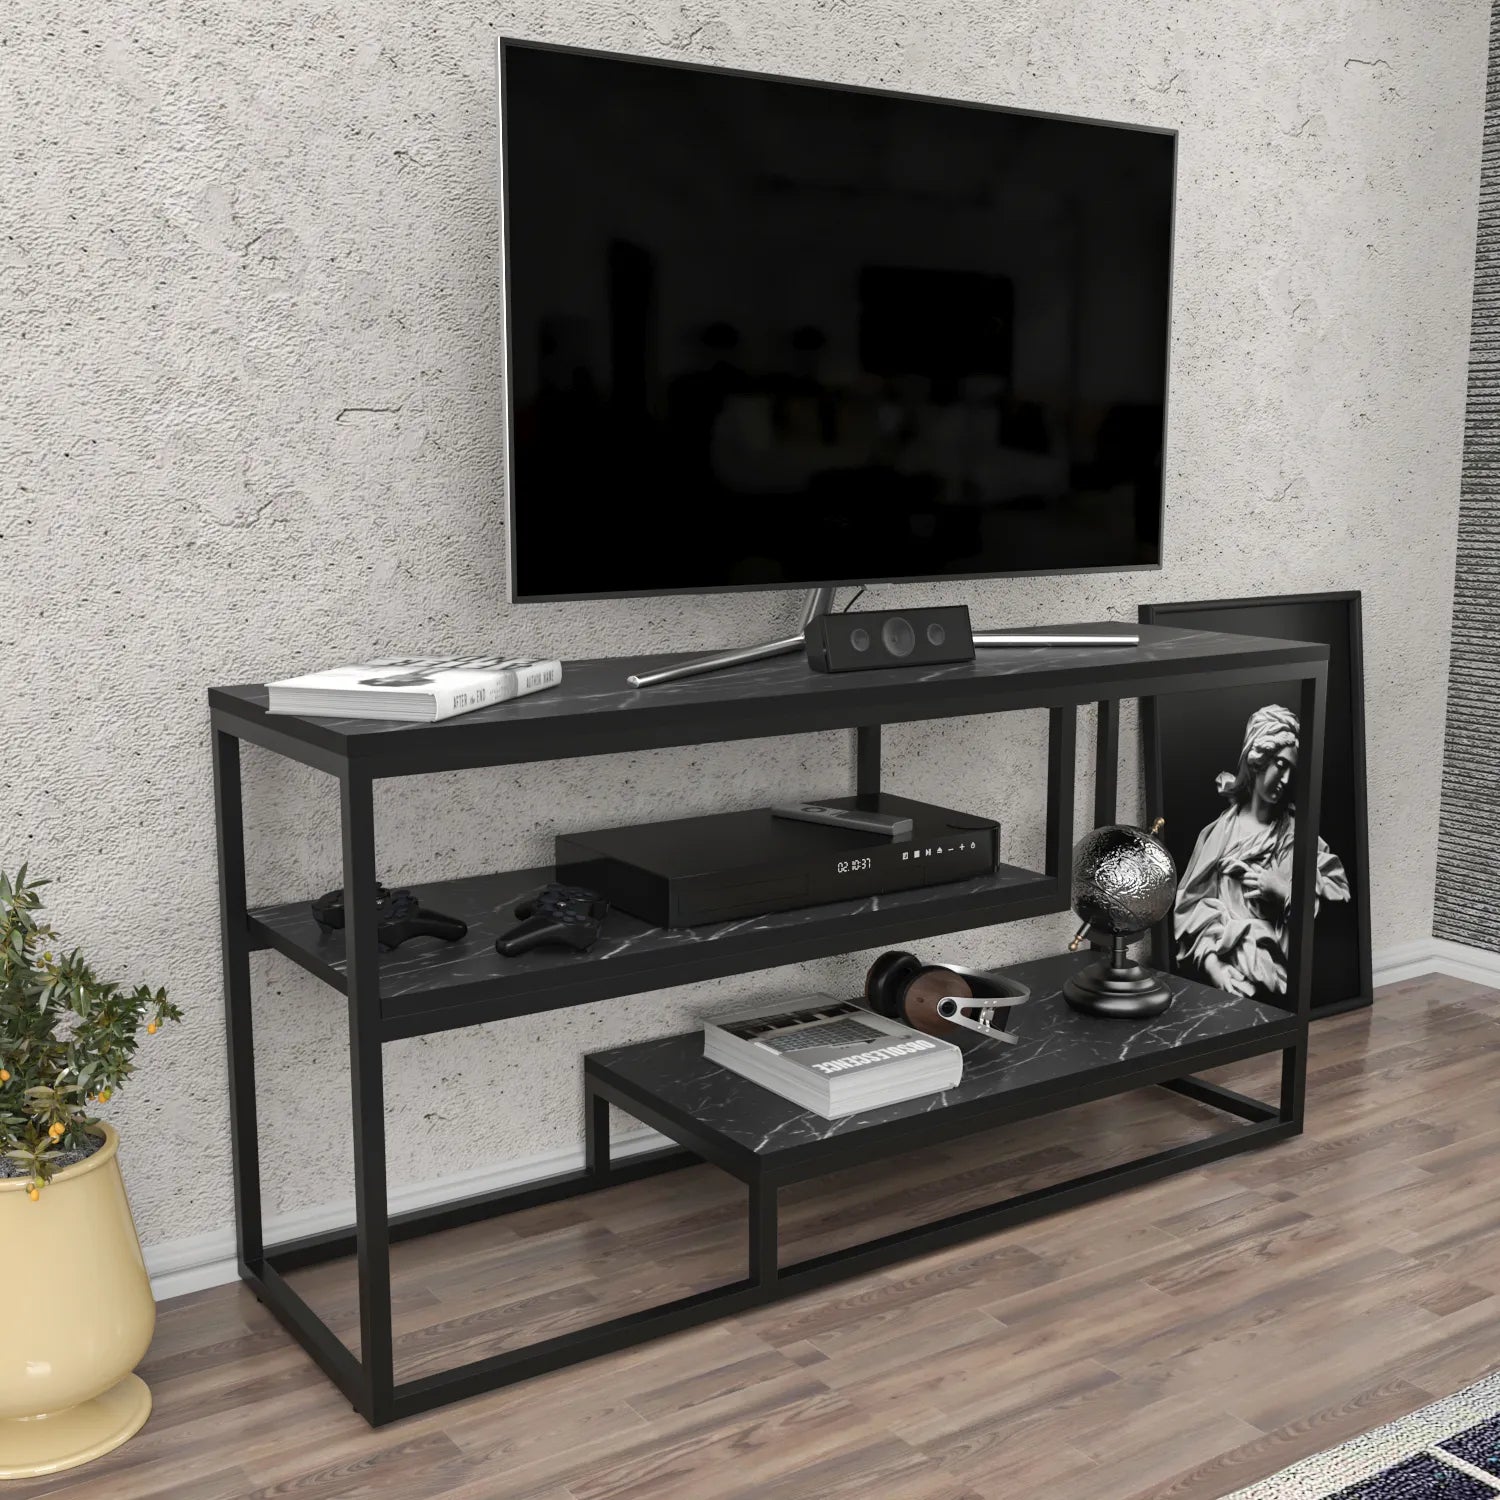 Lorin 47 inch Wide Metal Wood TV Stand Media Console for TVs up to 55 inch